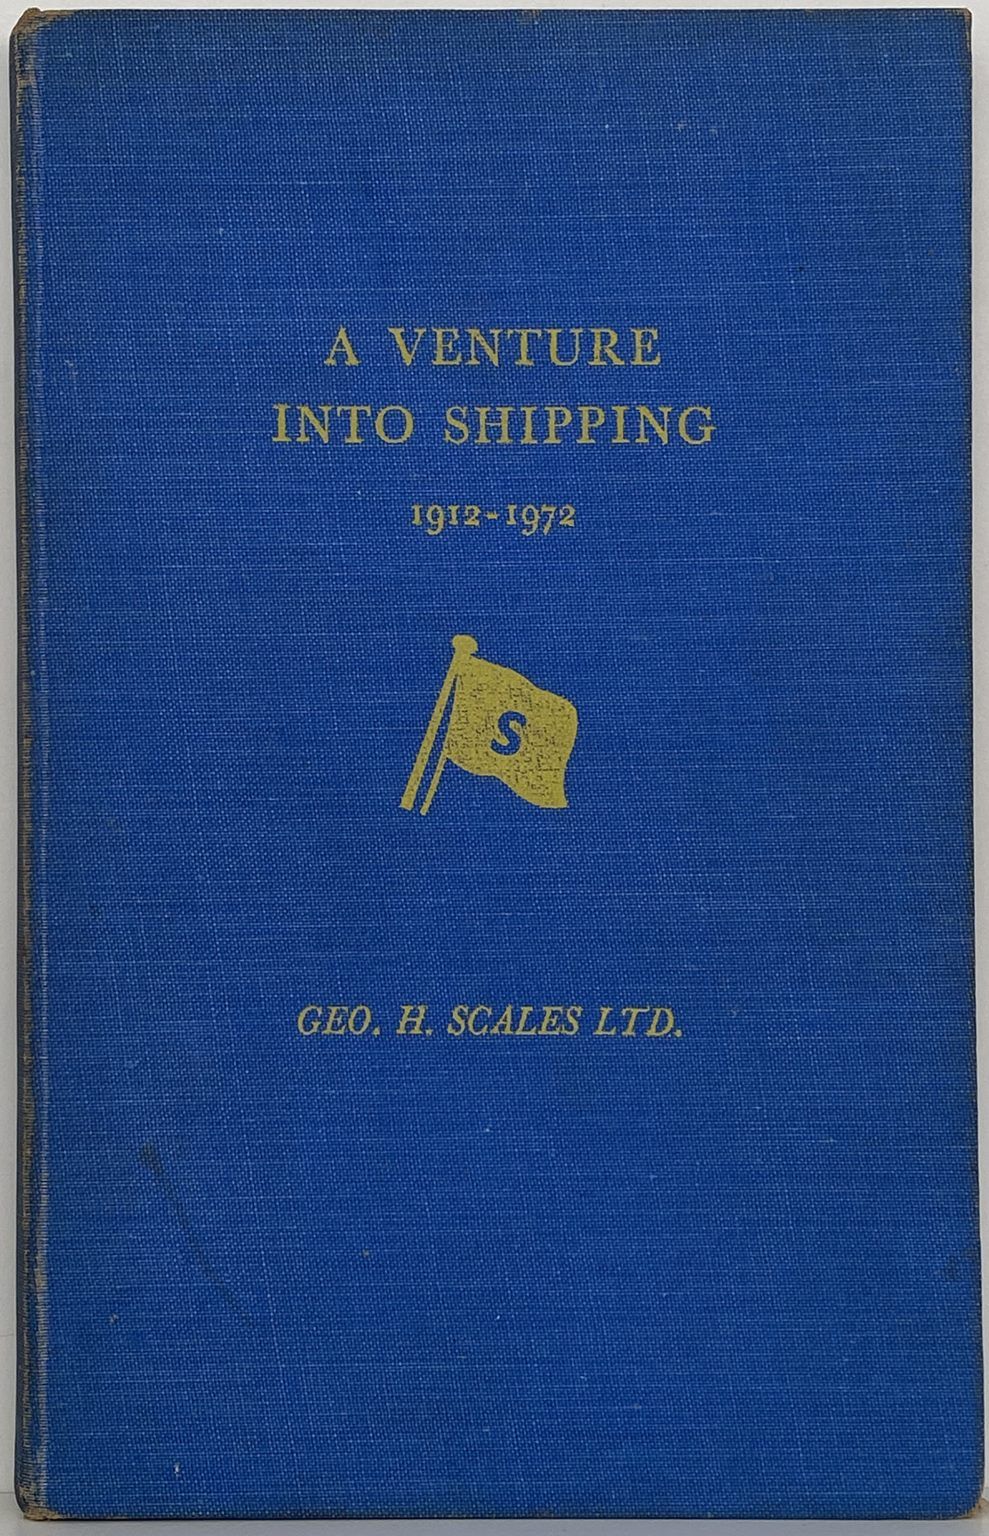 A VENTURE INTO SHIPPING: History of Geo H. Scales 1912 - 1972